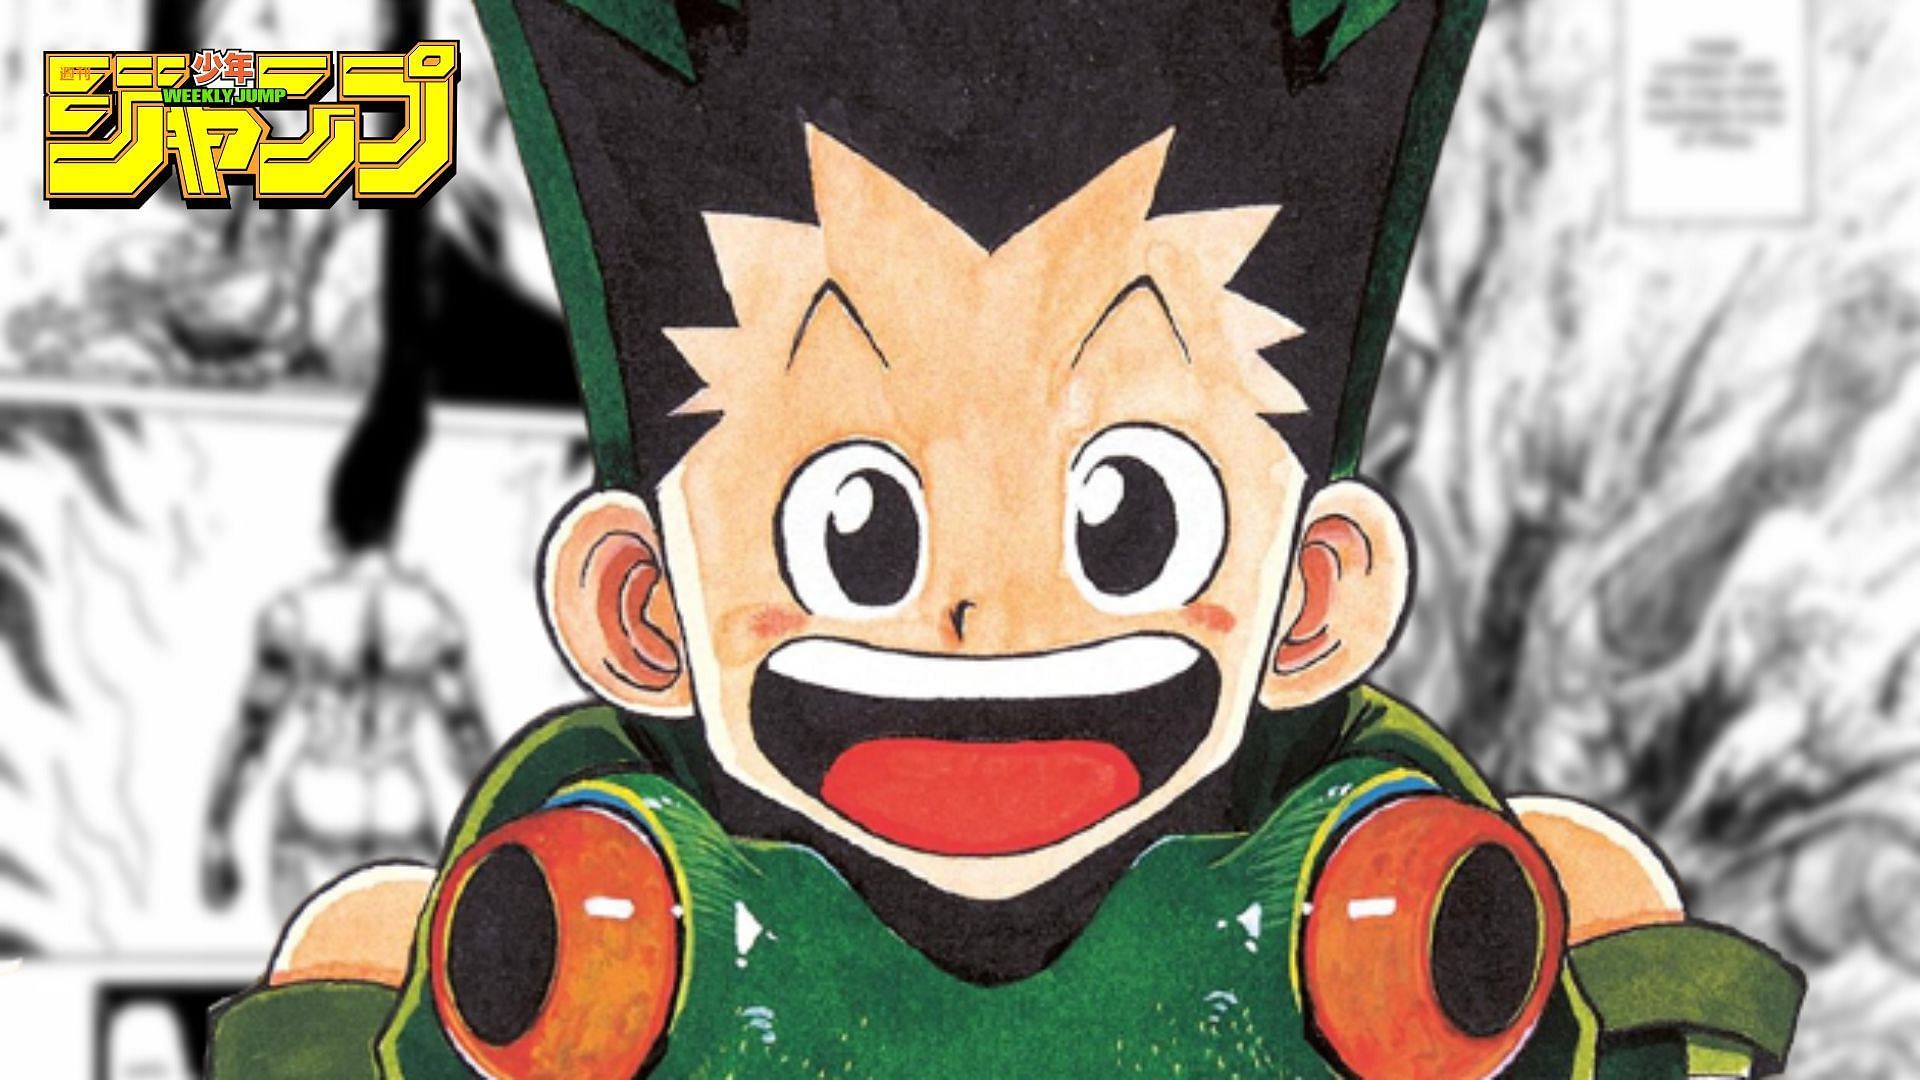 Hunter x Hunter Manga Returns With New Chapters on October 23